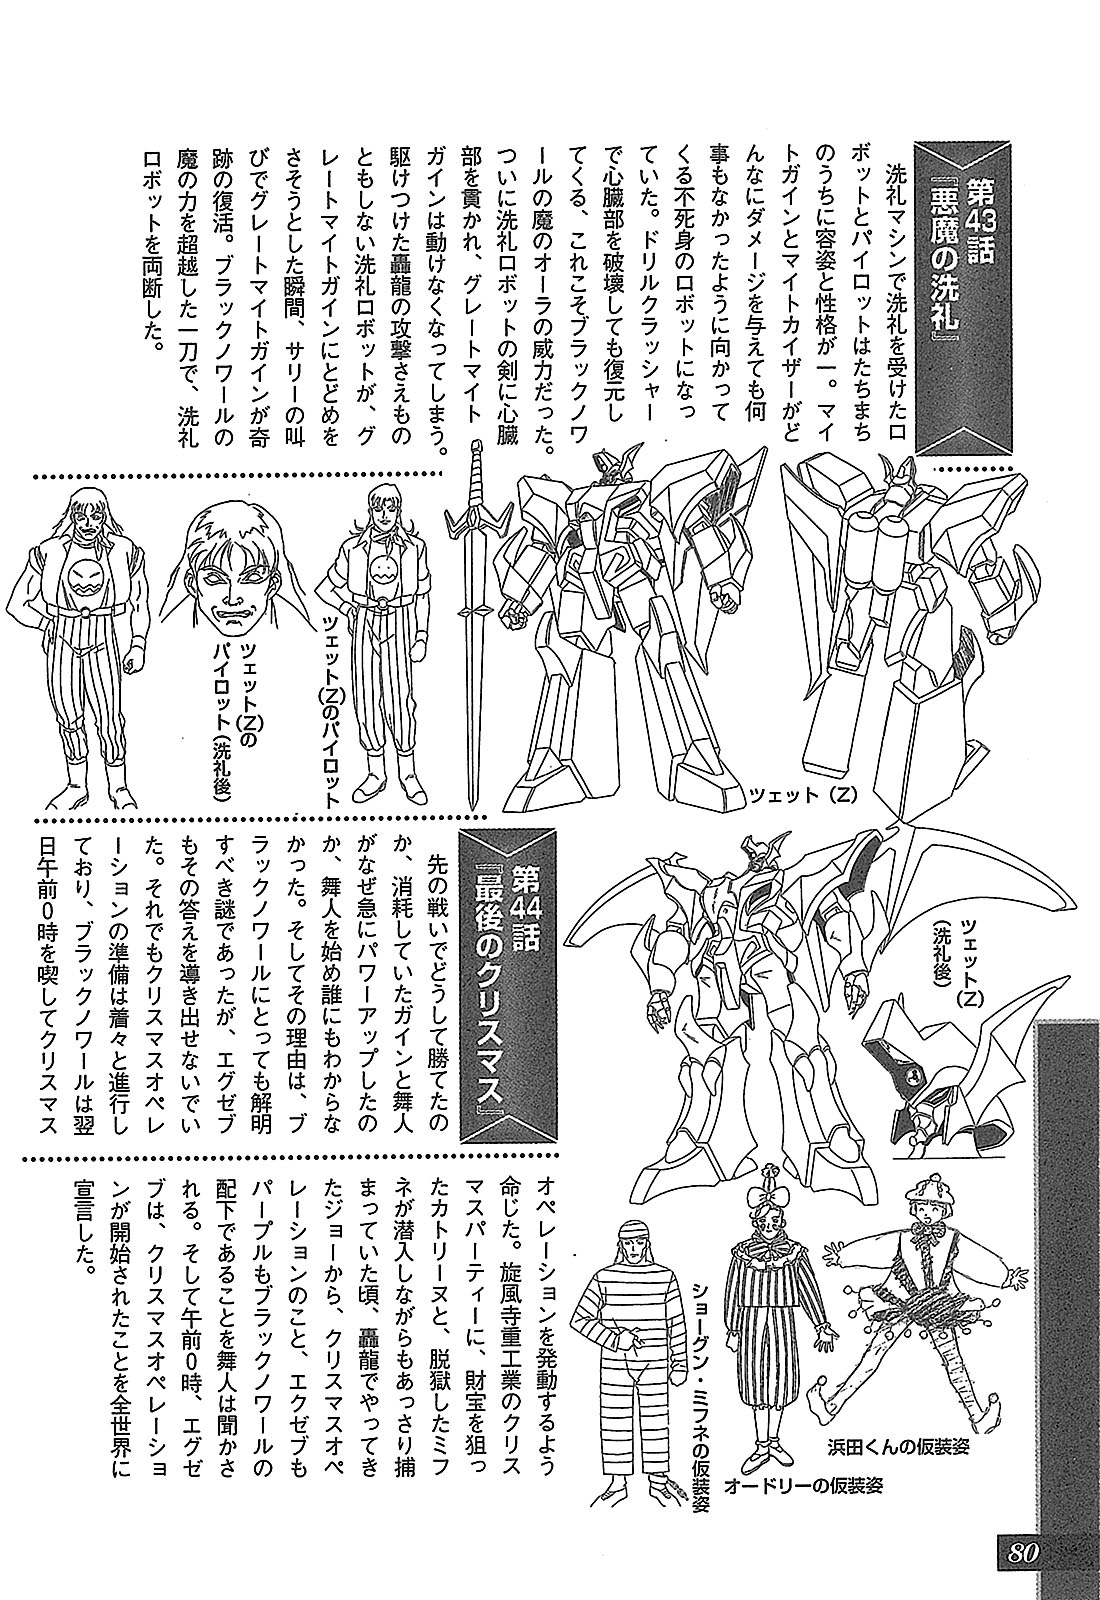 Dengeki Hobby Books - Data Collection No.11 - The Brave Express Might Gaine 81